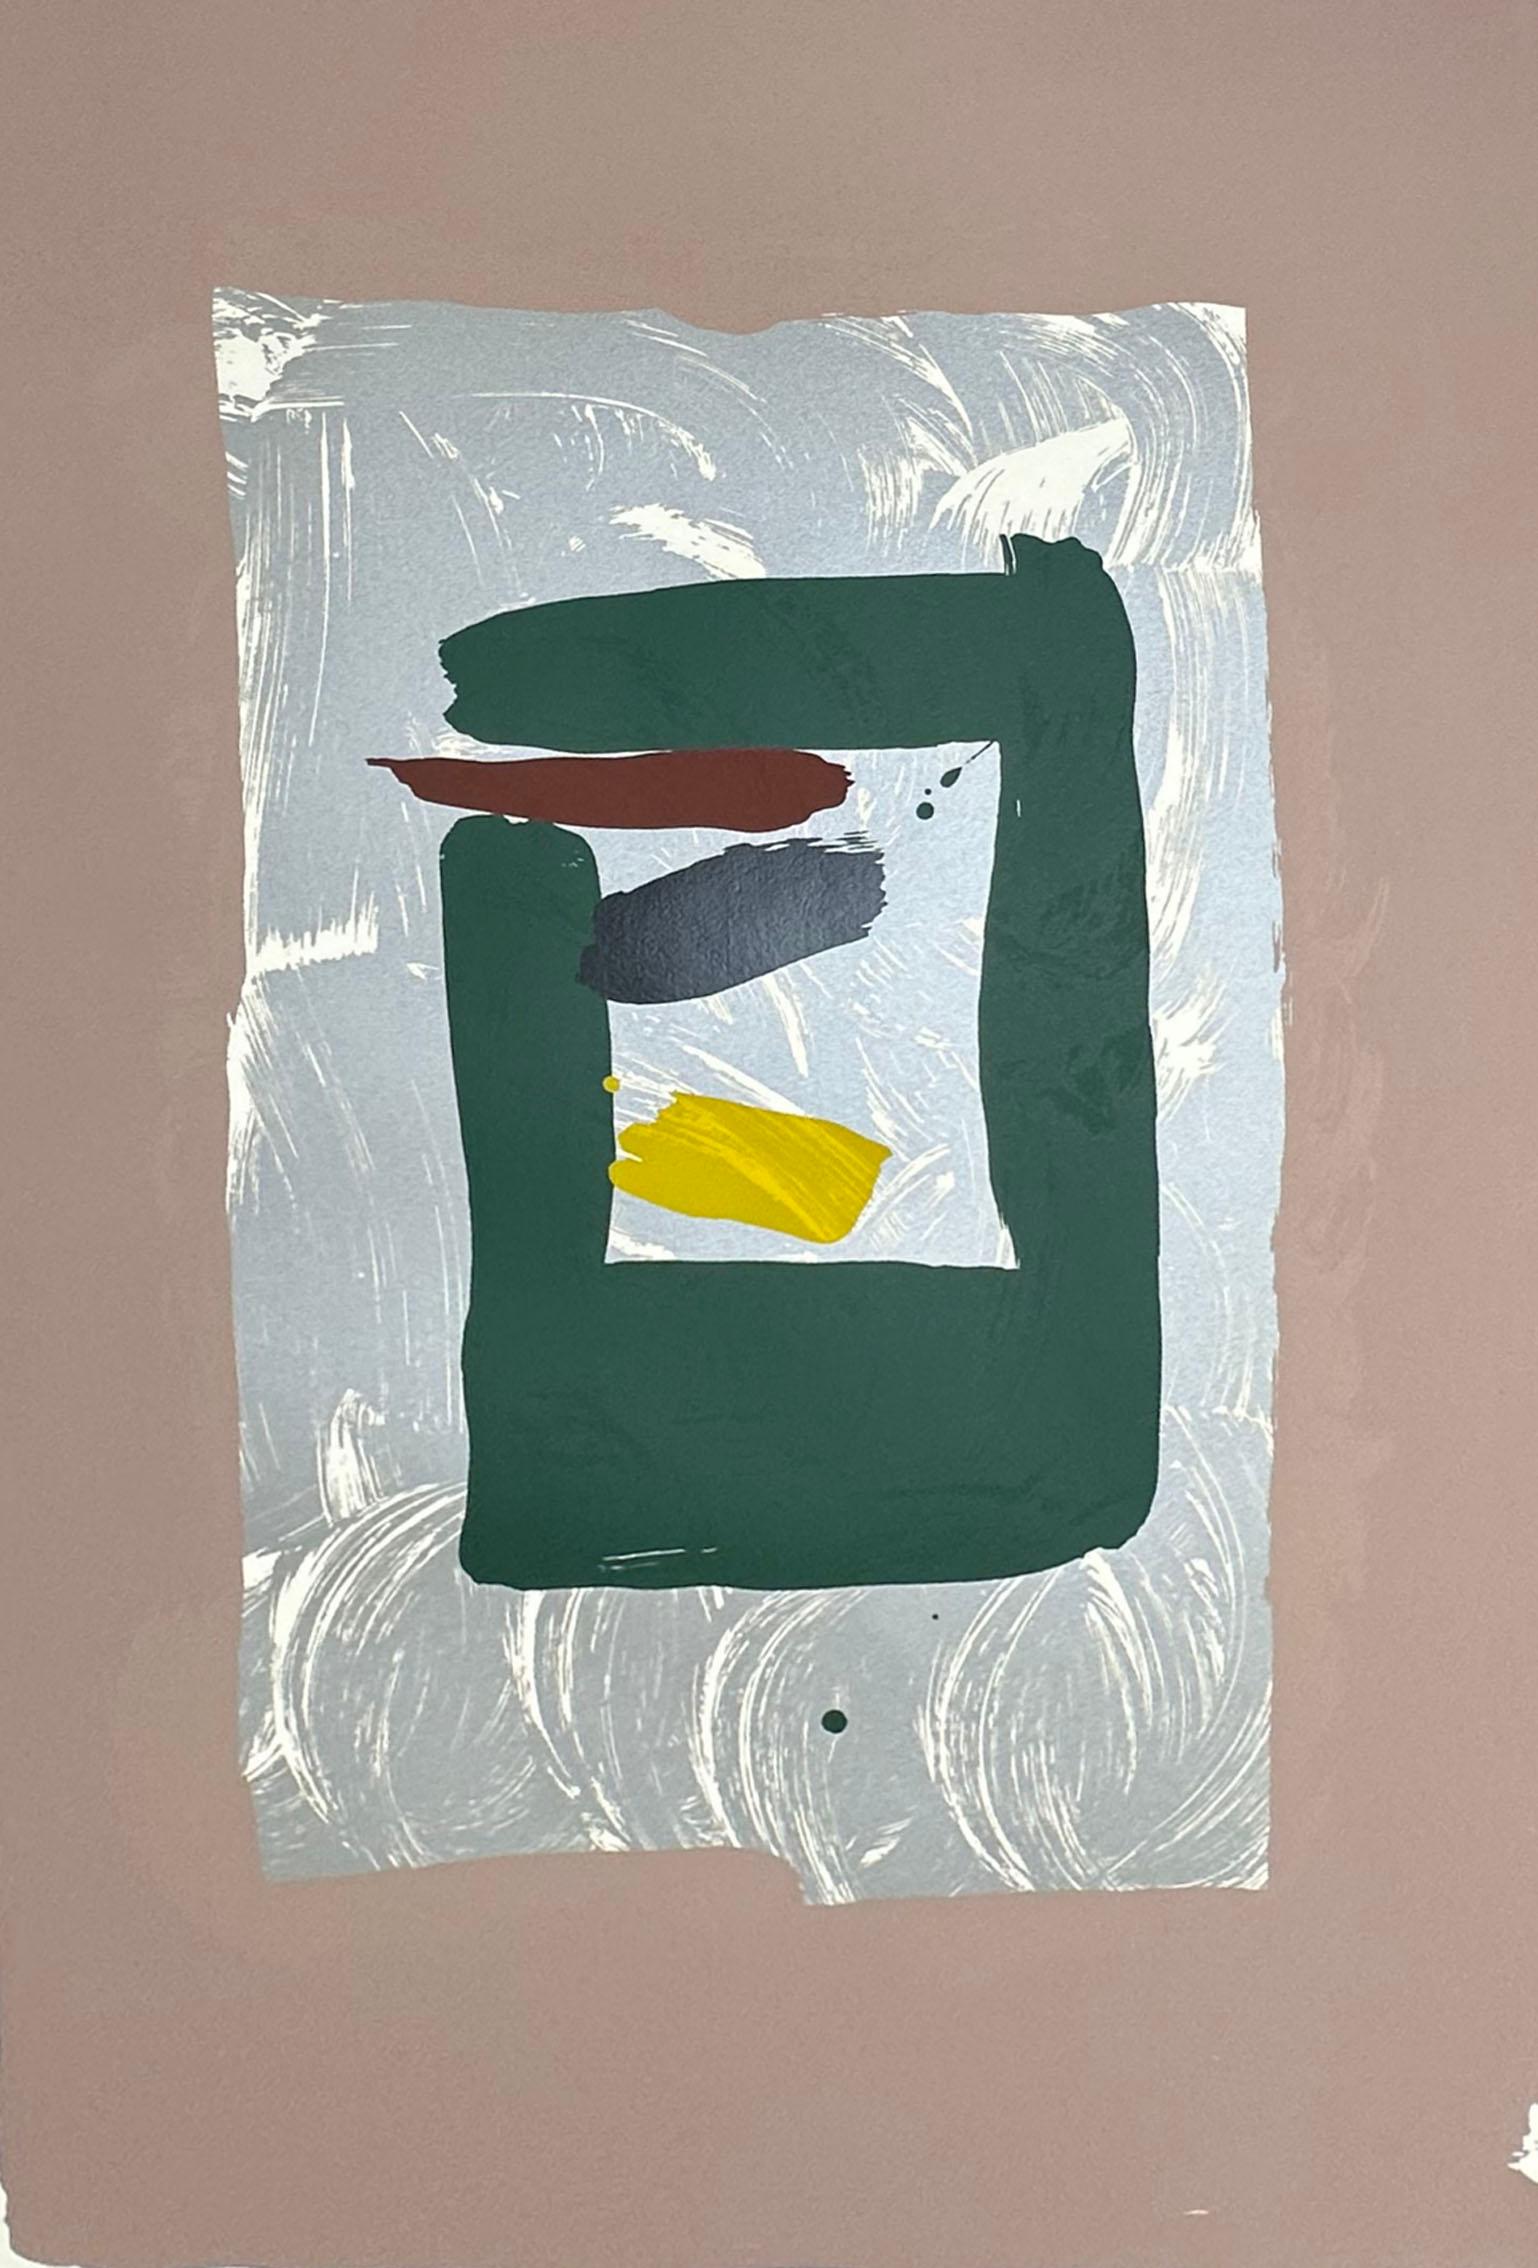 A limited edition serigraph print by the Japanese-American artist Kikuo Saito (1939-2016). This abstract work has a central dark green rectangle printed on a silver background and accented with a brown-red, black, and yellow dash. A field of pale